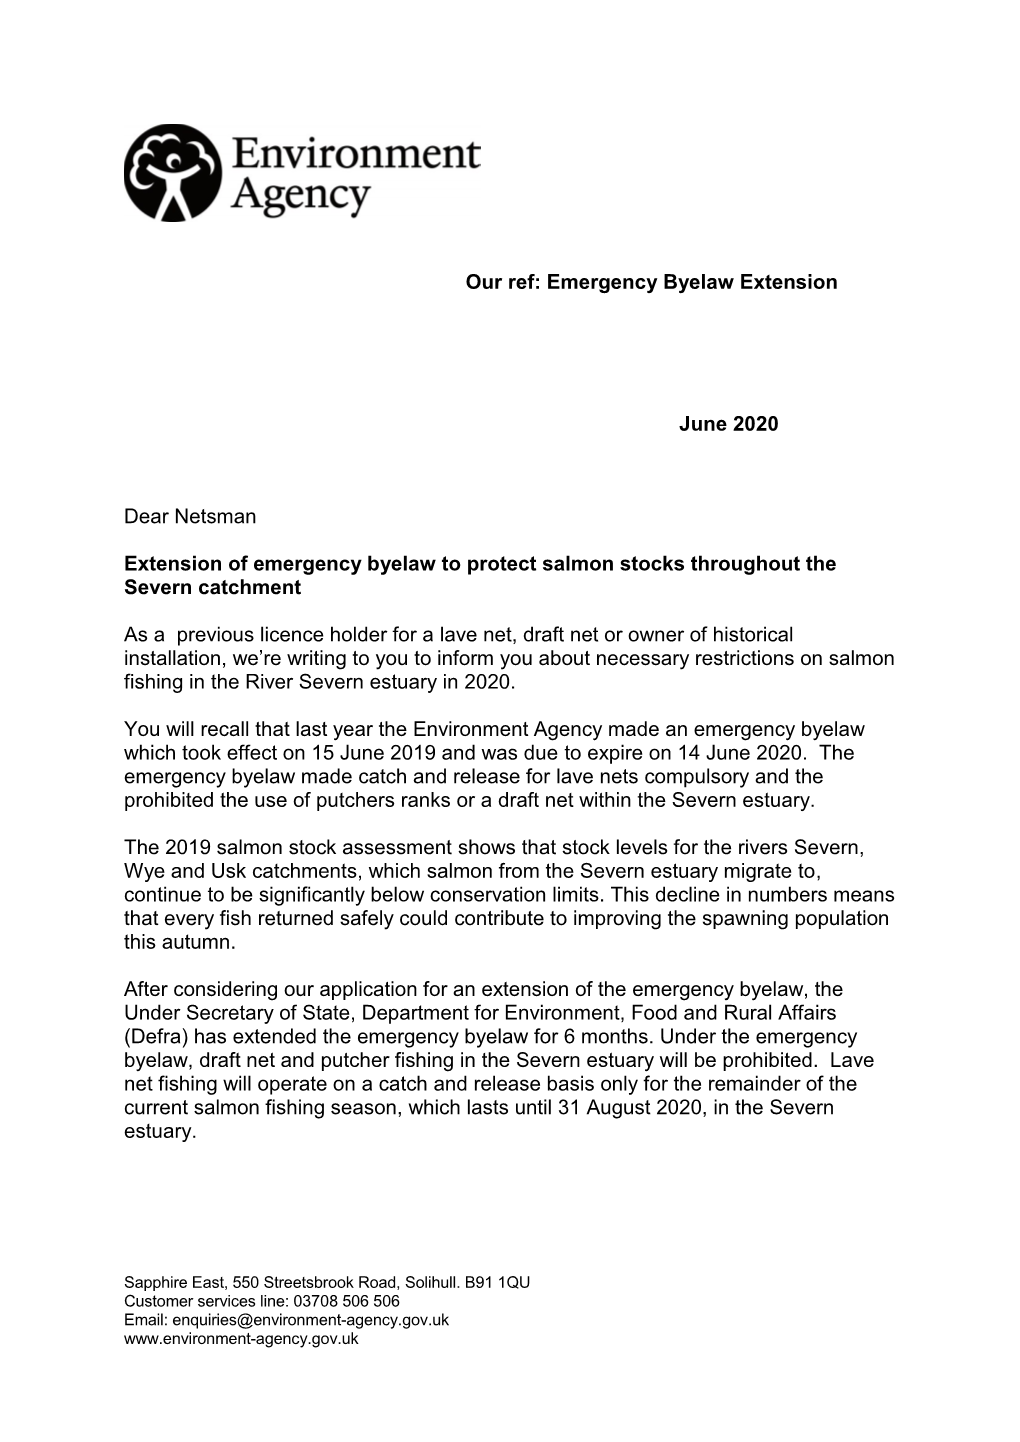 2020 06 03 Final Covering Letter to Nets June 2020 EB Extension.Pdf